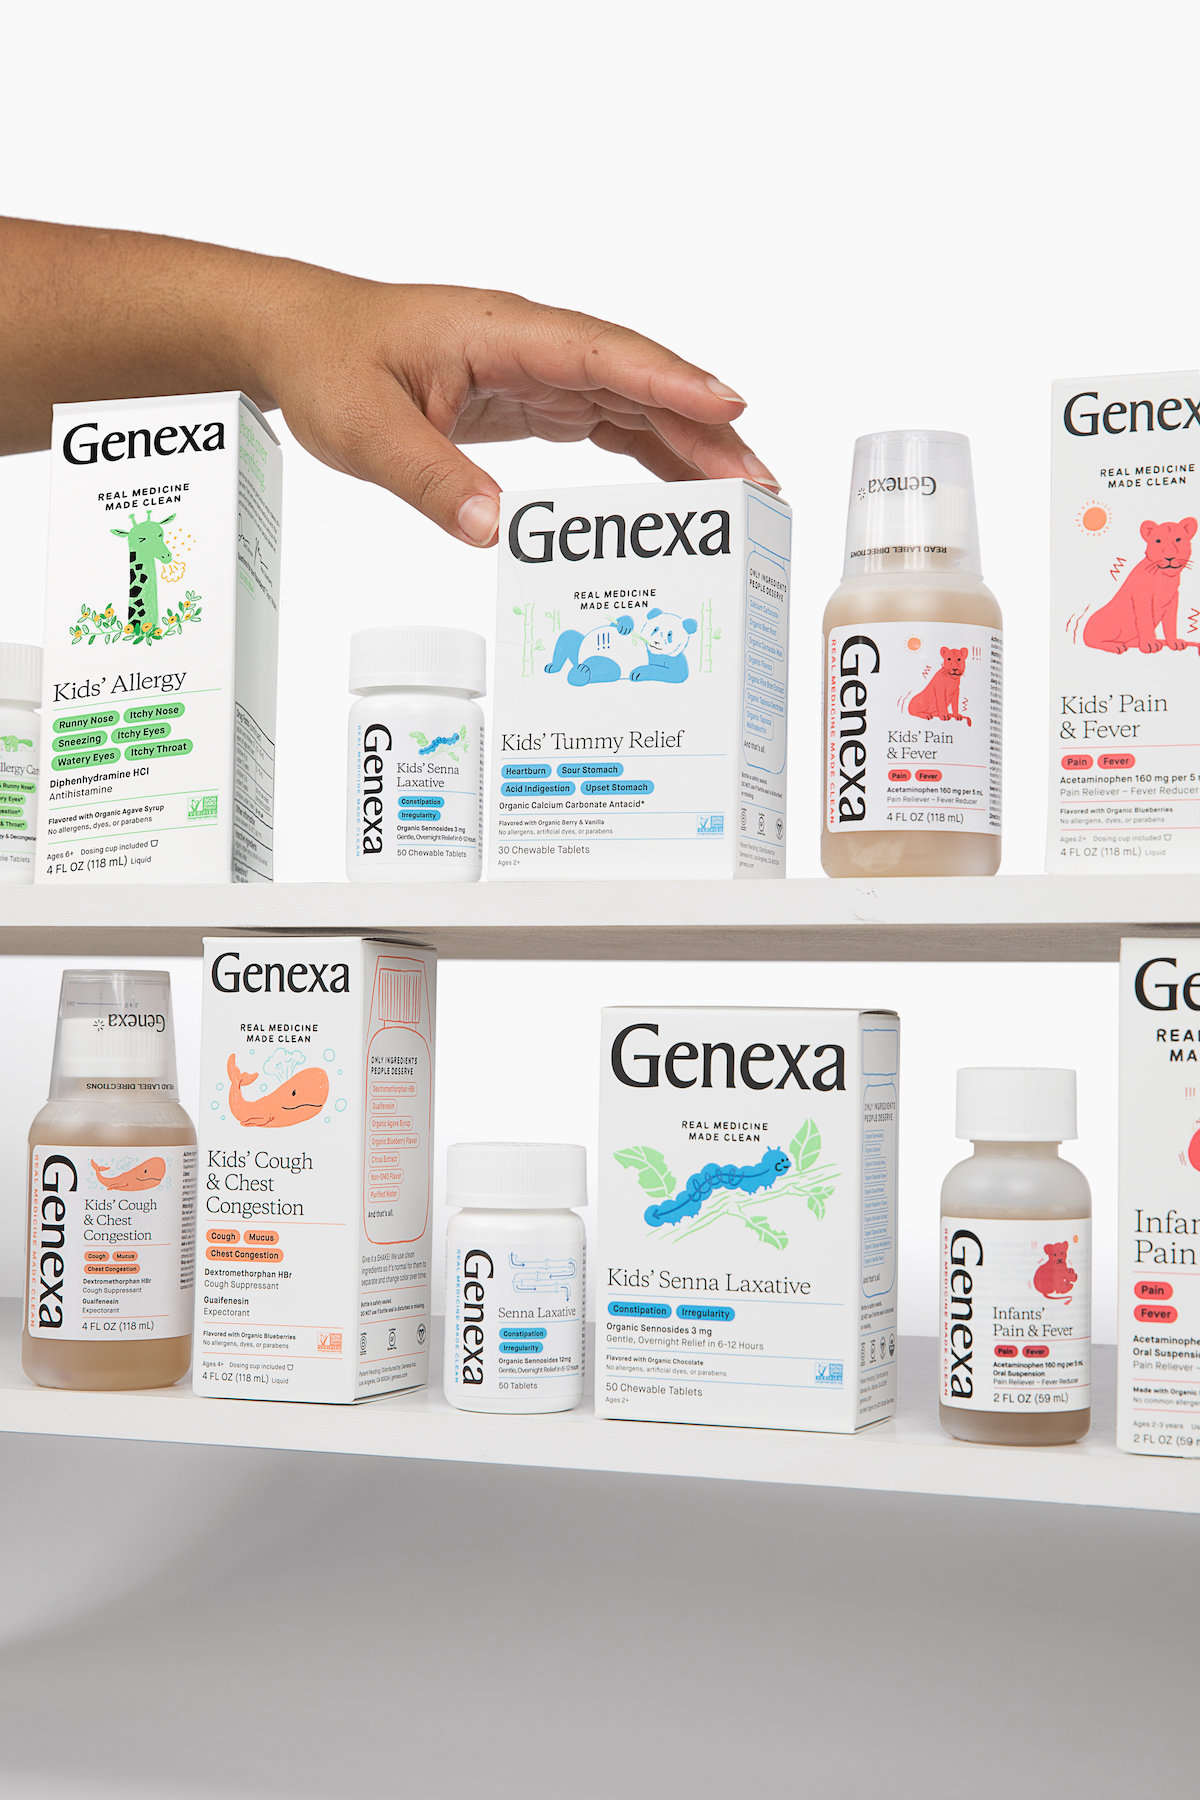 Genexa: Amazing Clean Medicine Options Without Compromise